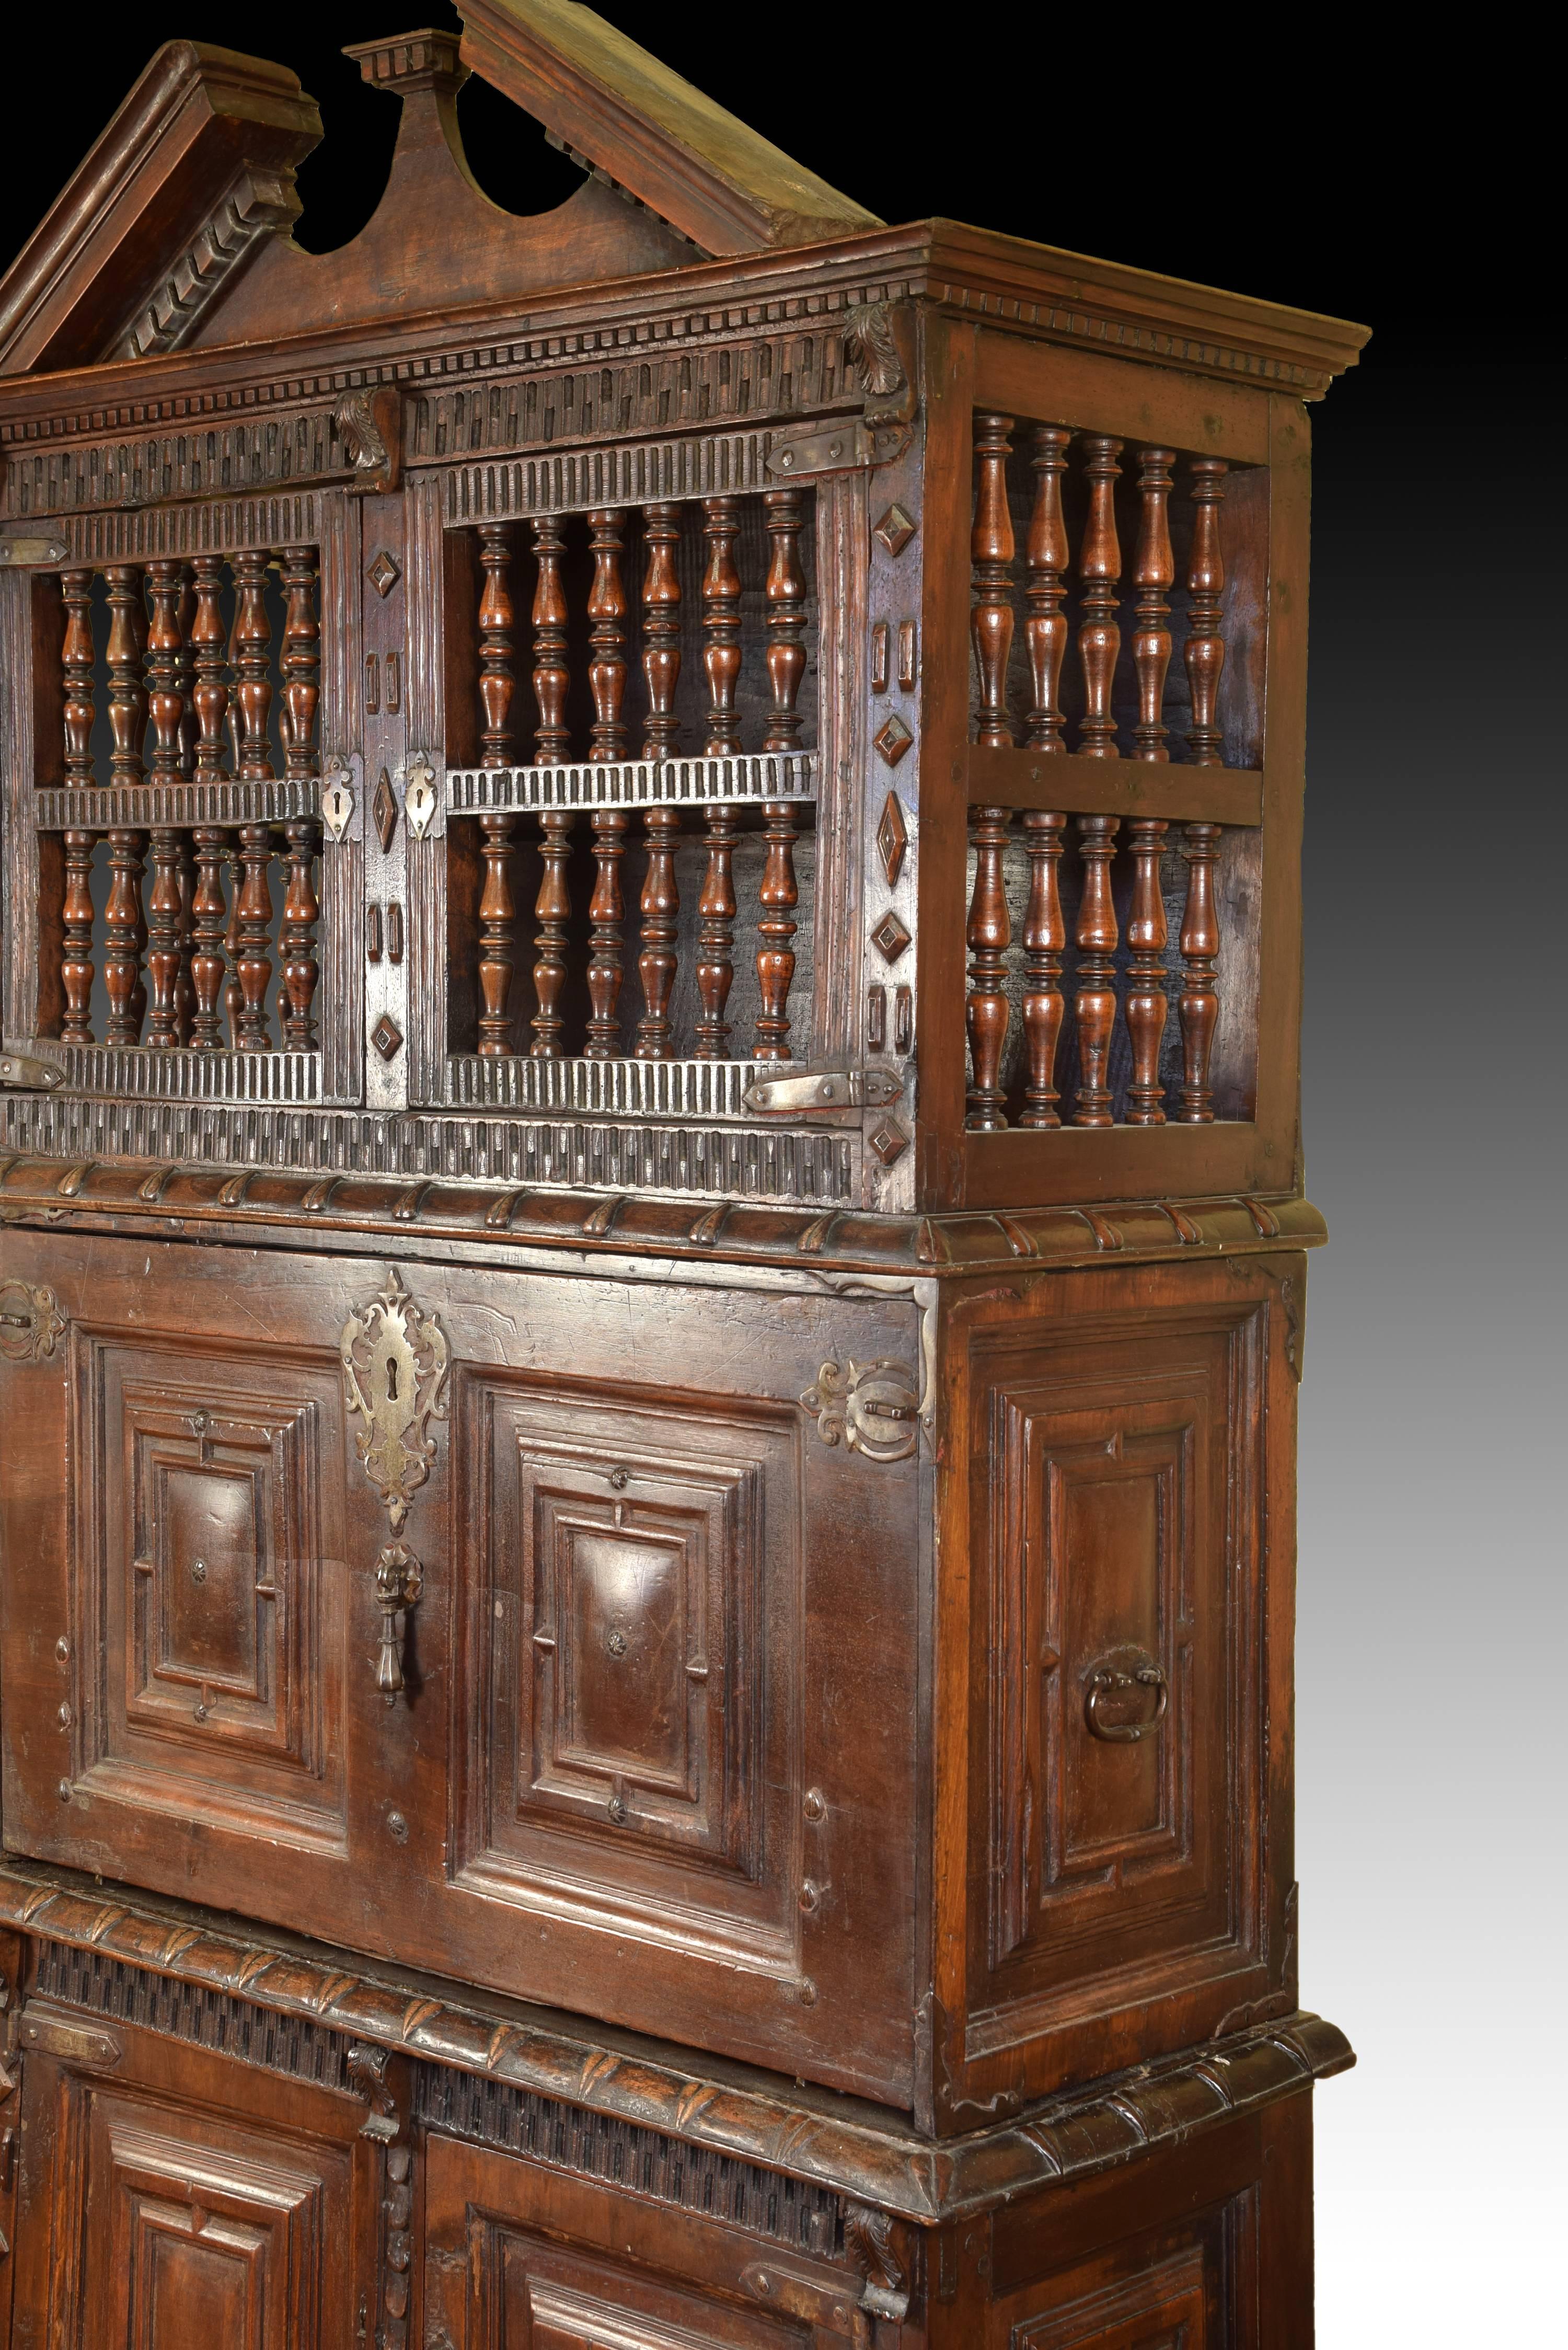 Baroque Cupboard with Writing Desk, Wood, Wrought Iron, Asturias, Spain 17th Century